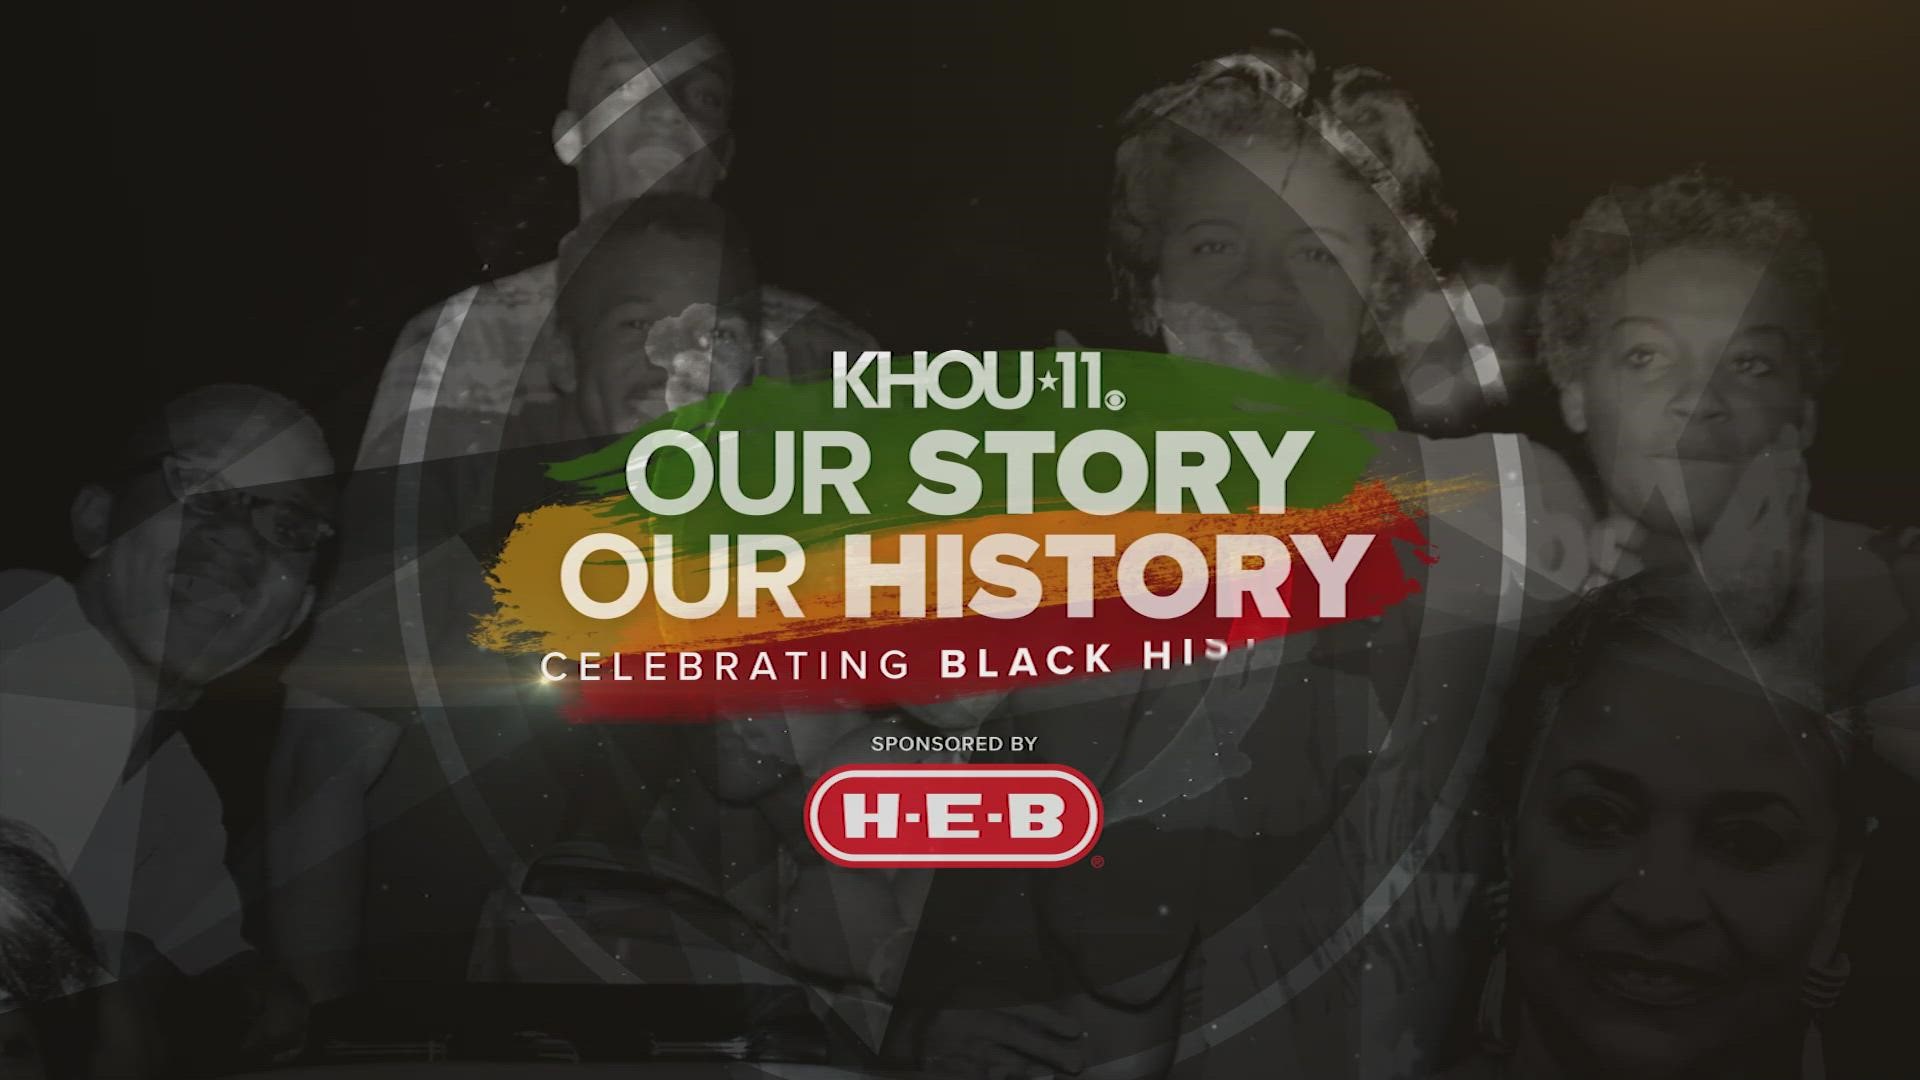 This KHOU 11+ special highlights the people, places, events and foods of the Black community in Houston.